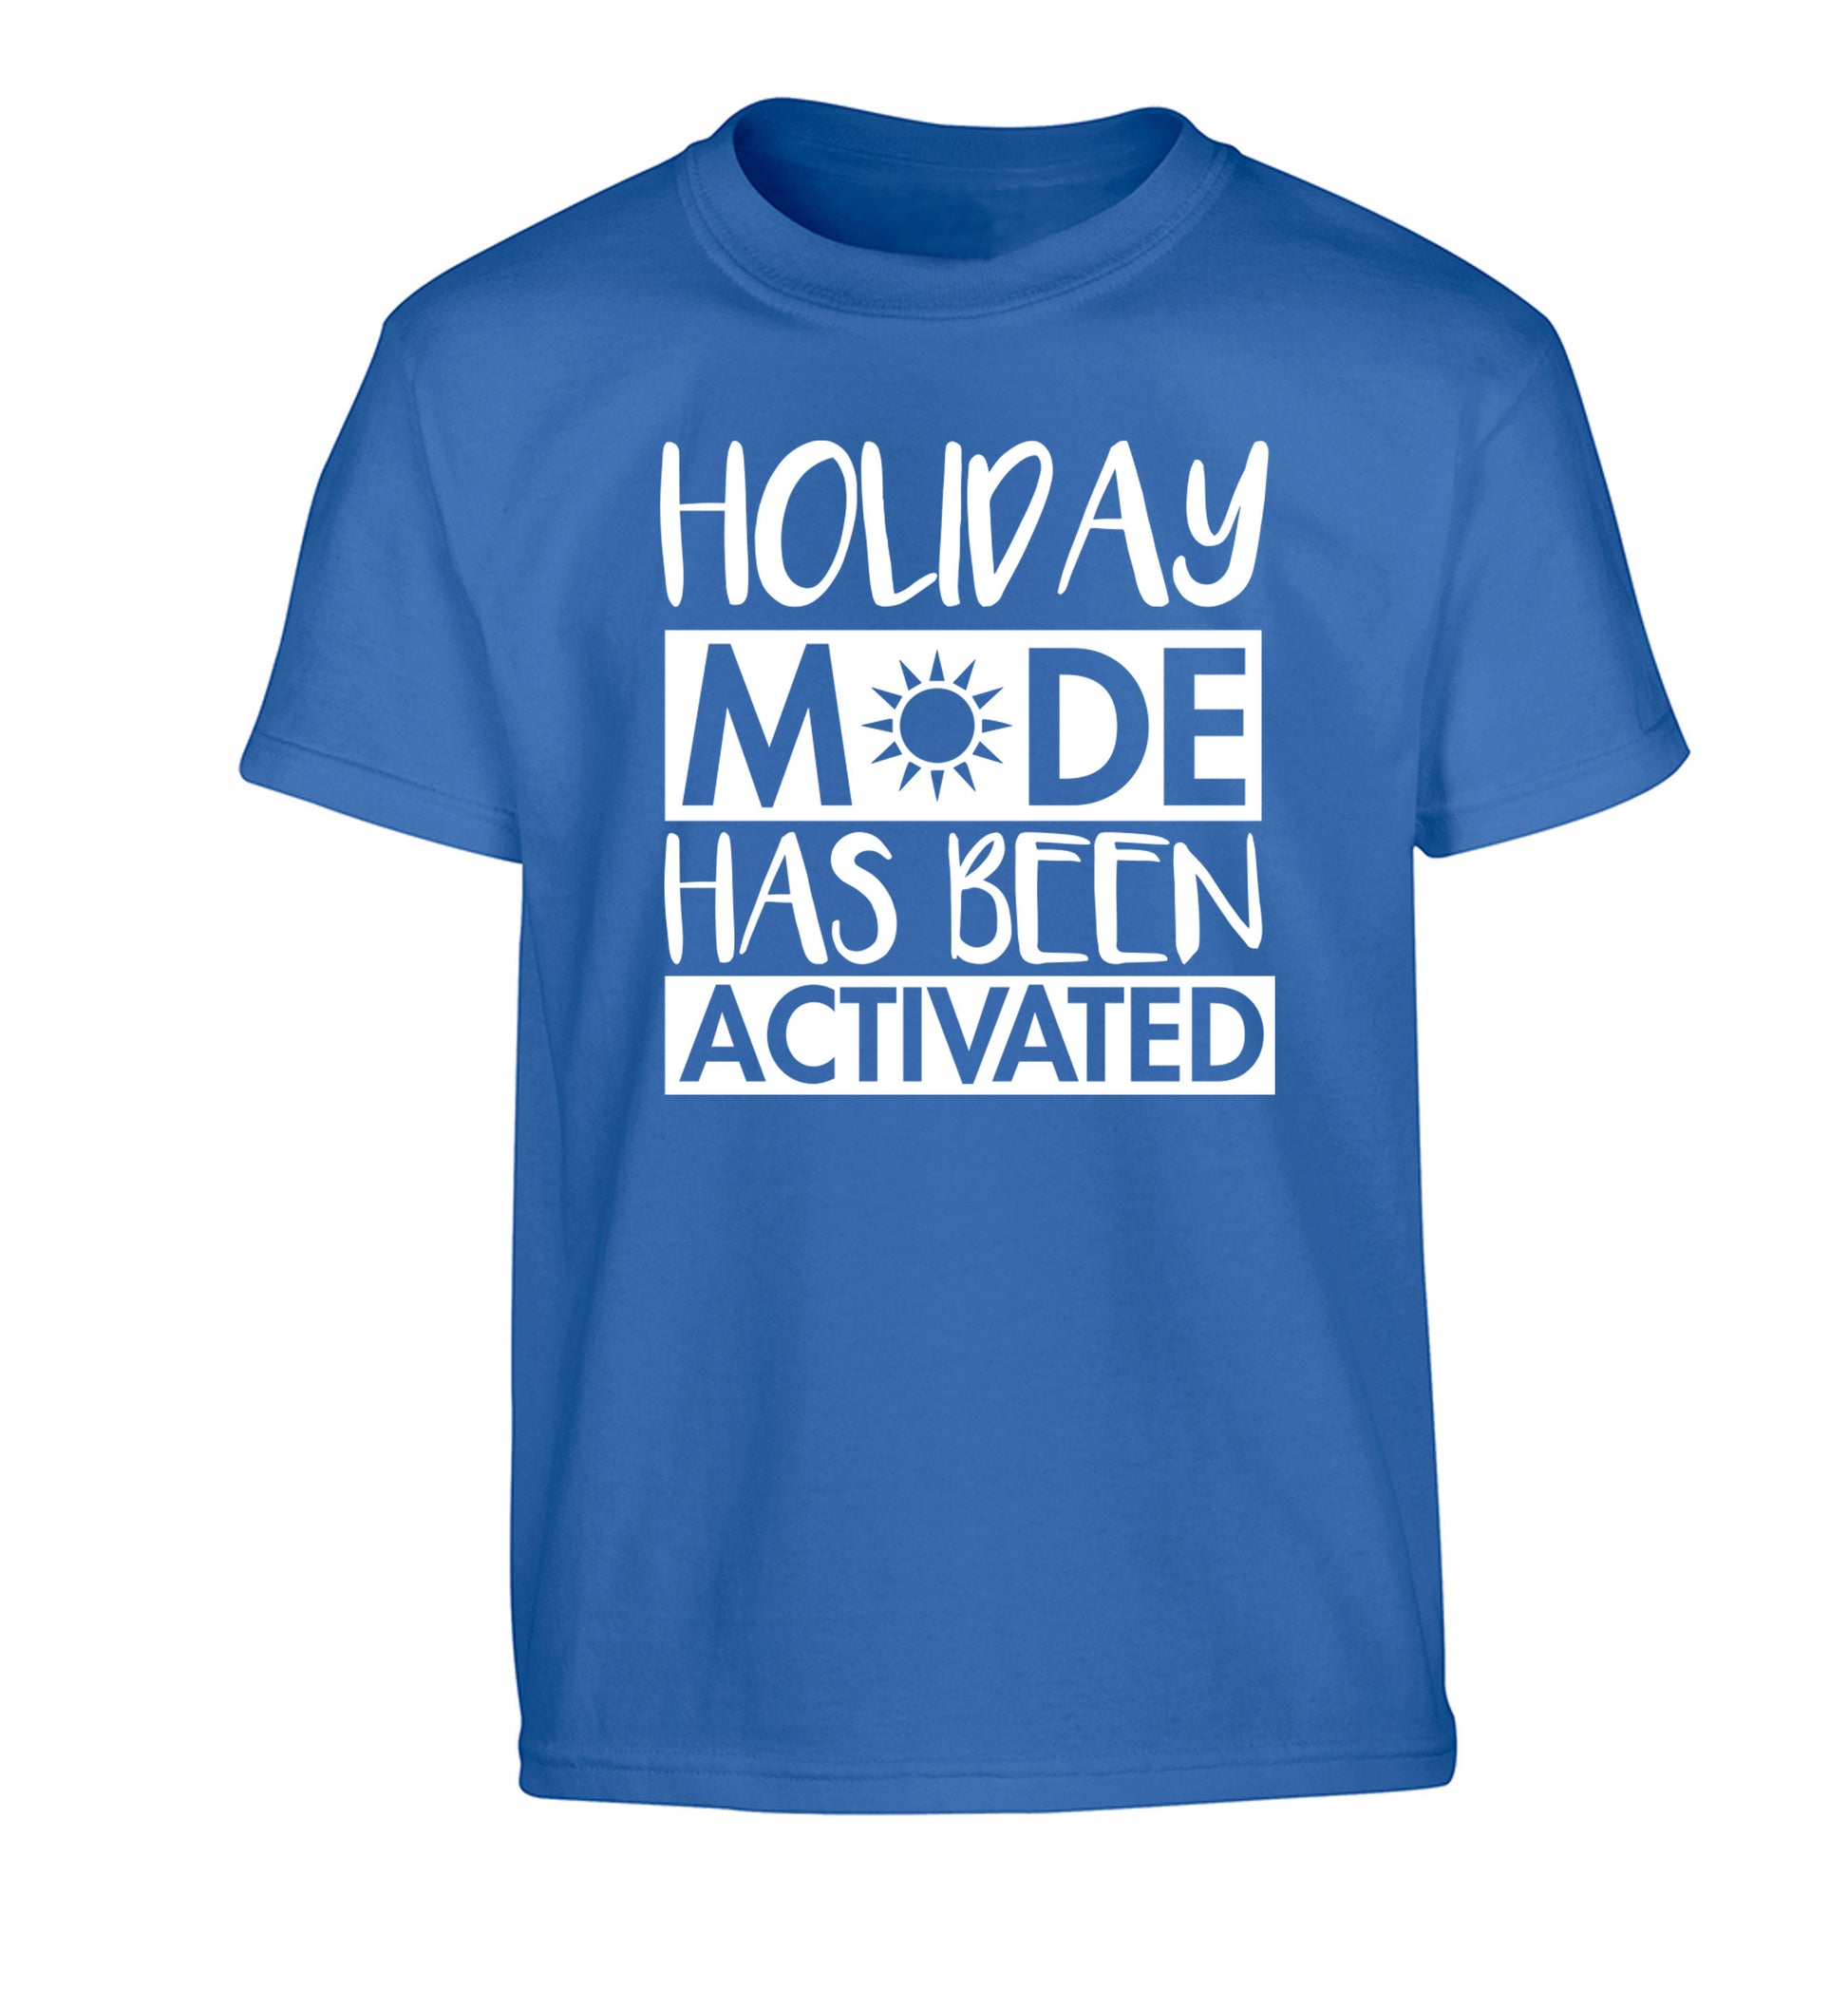 Holiday mode has been activated Children's blue Tshirt 12-14 Years